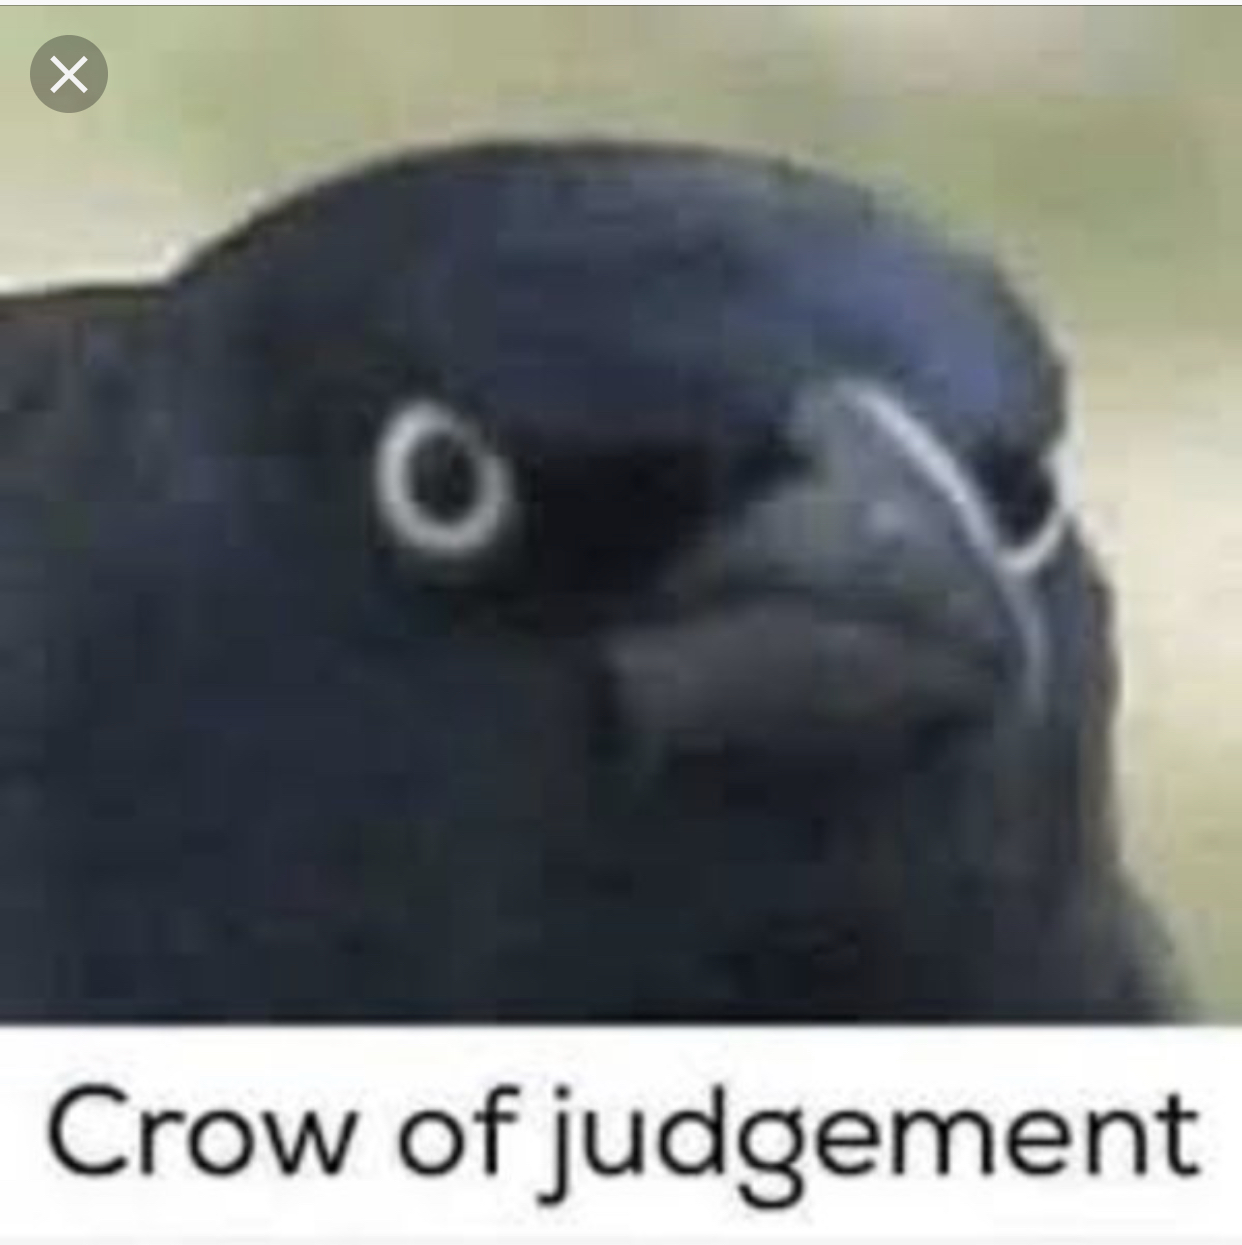 High Quality Crow of judgement Blank Meme Template